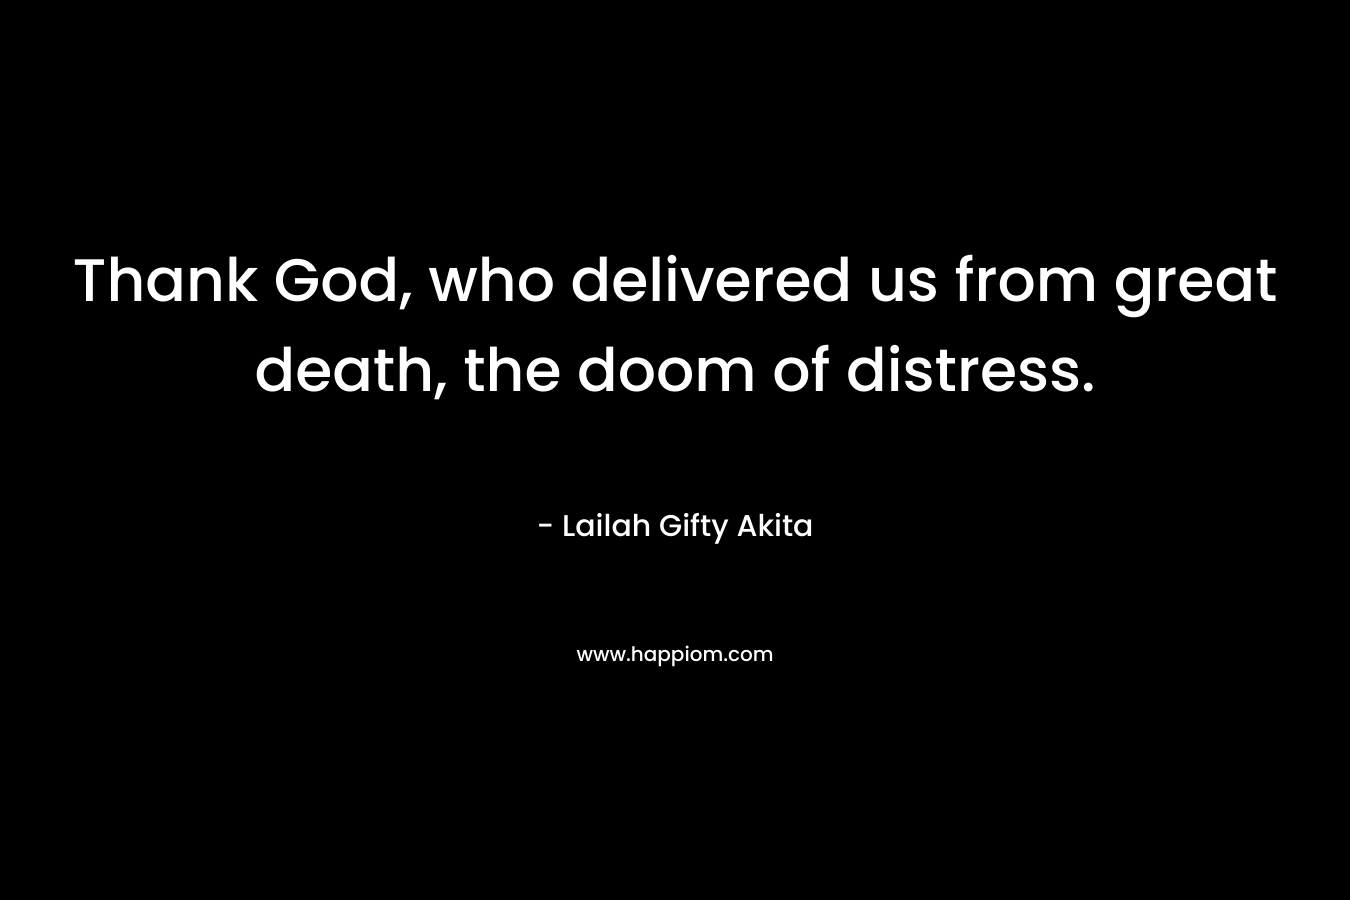 Thank God, who delivered us from great death, the doom of distress.